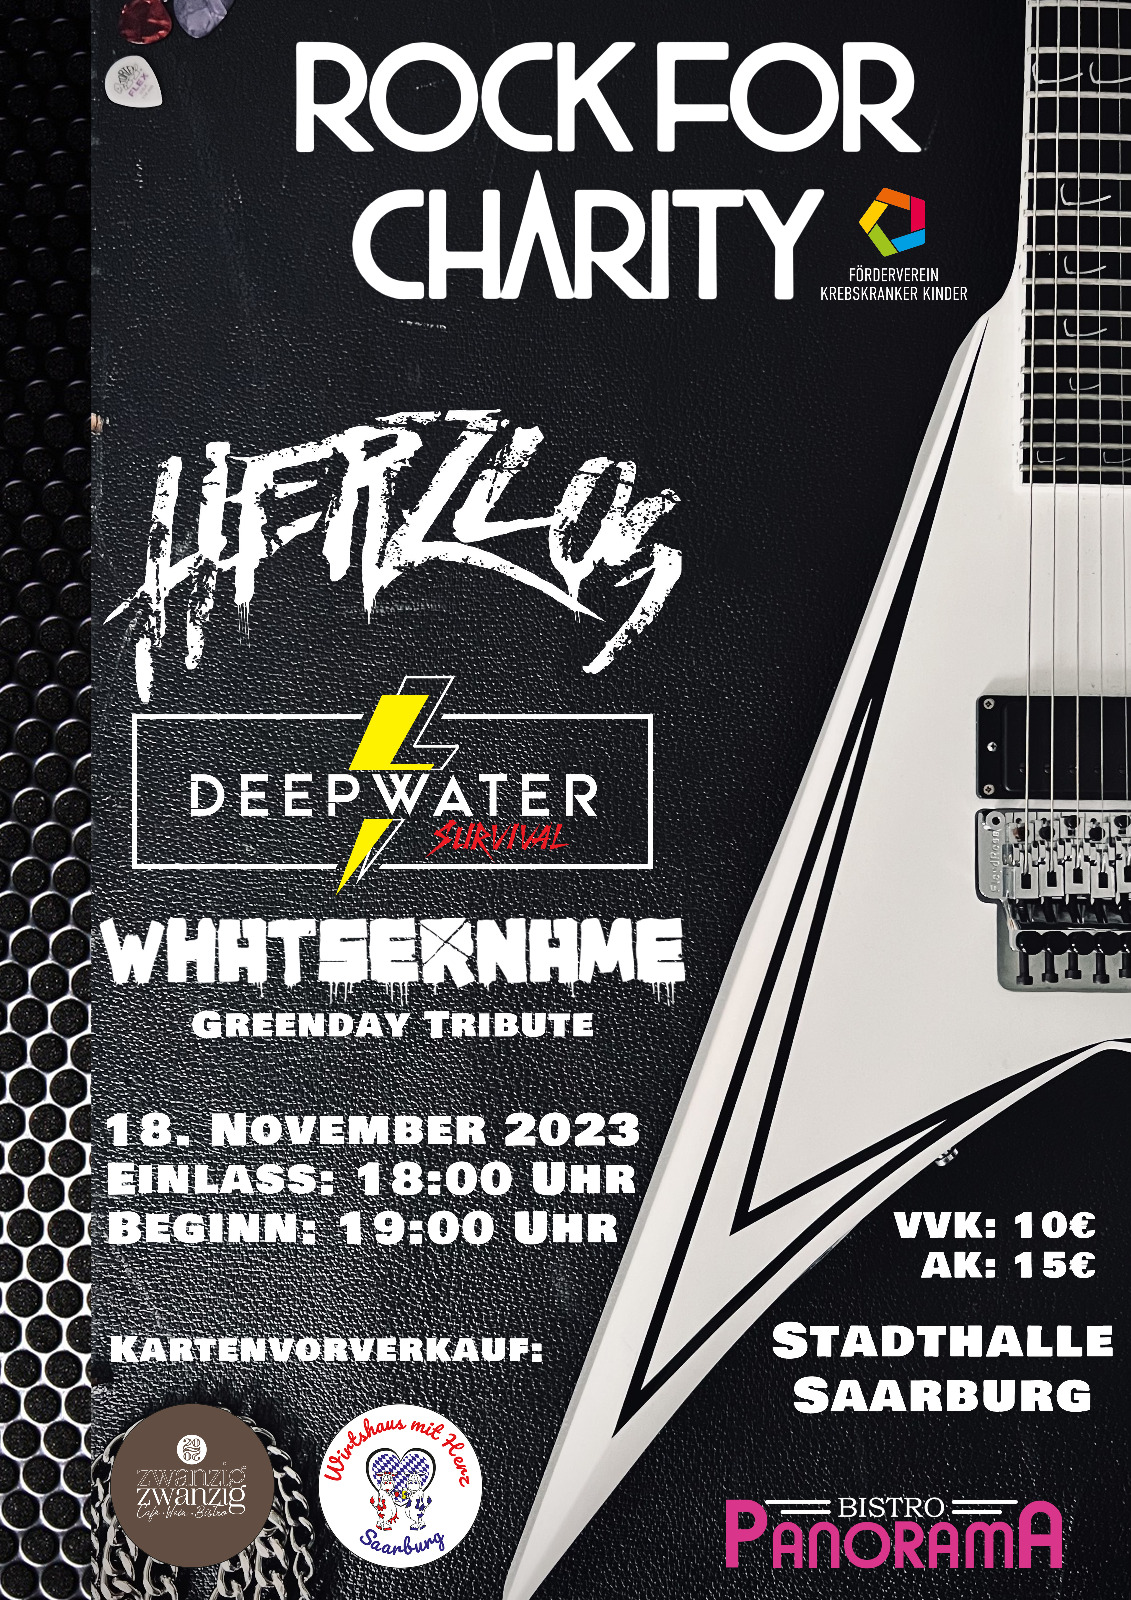 Rock for charity